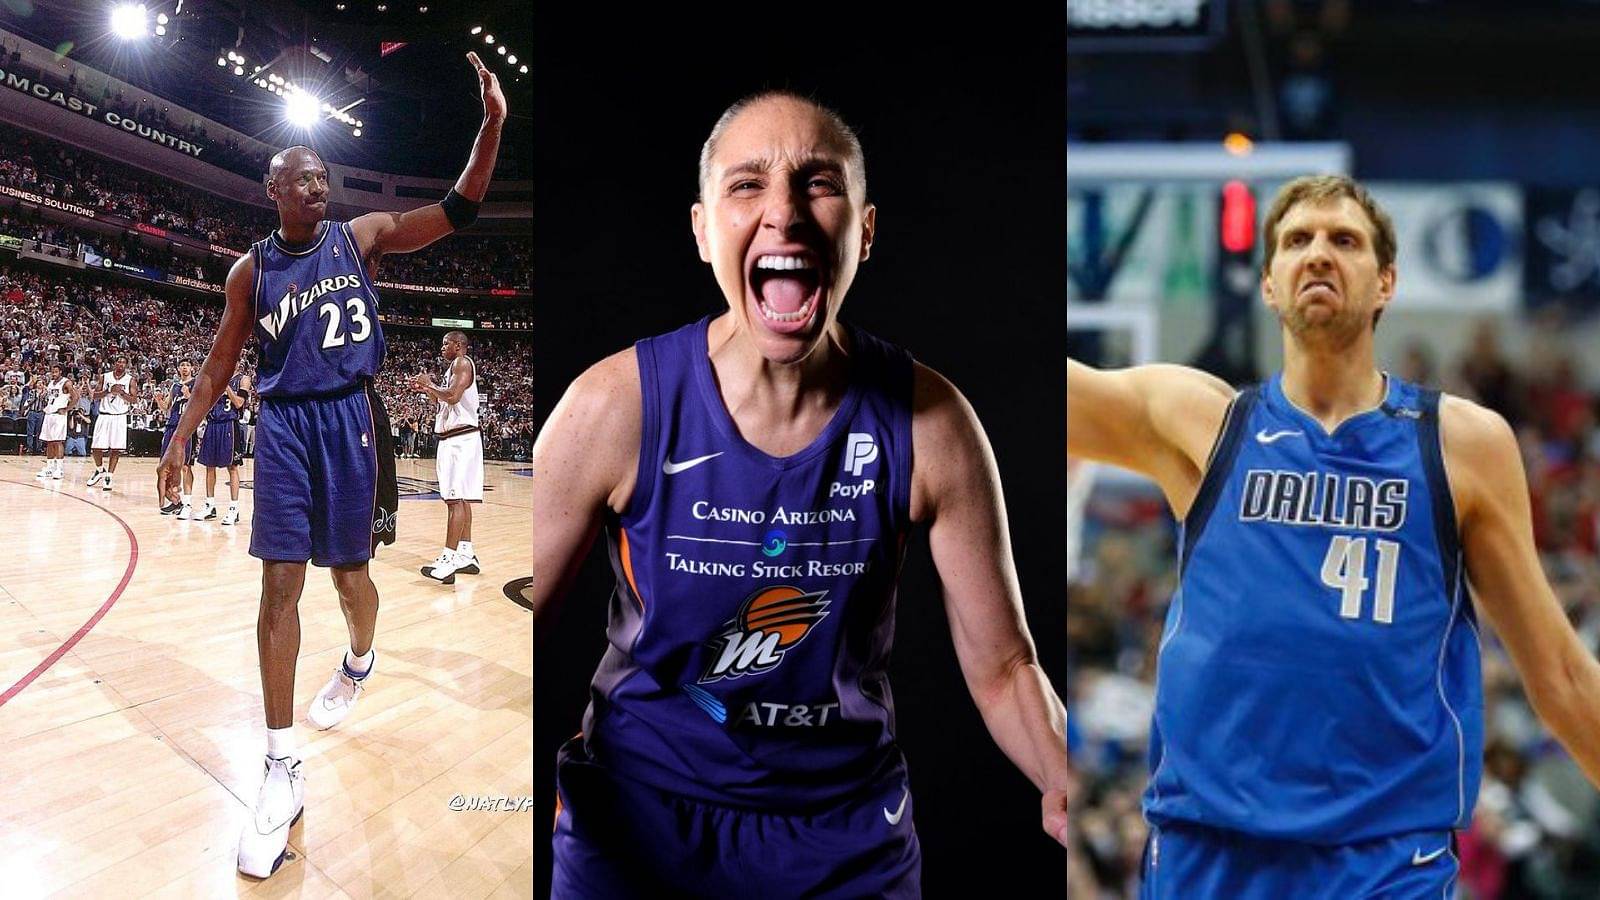 “Only Michael Jordan, Dirk Nowitzki and … Diana Taurasi”: 40-year-old Phoenix Mercury star joins an elite company after scoring 30 points against Los Angeles Sparks